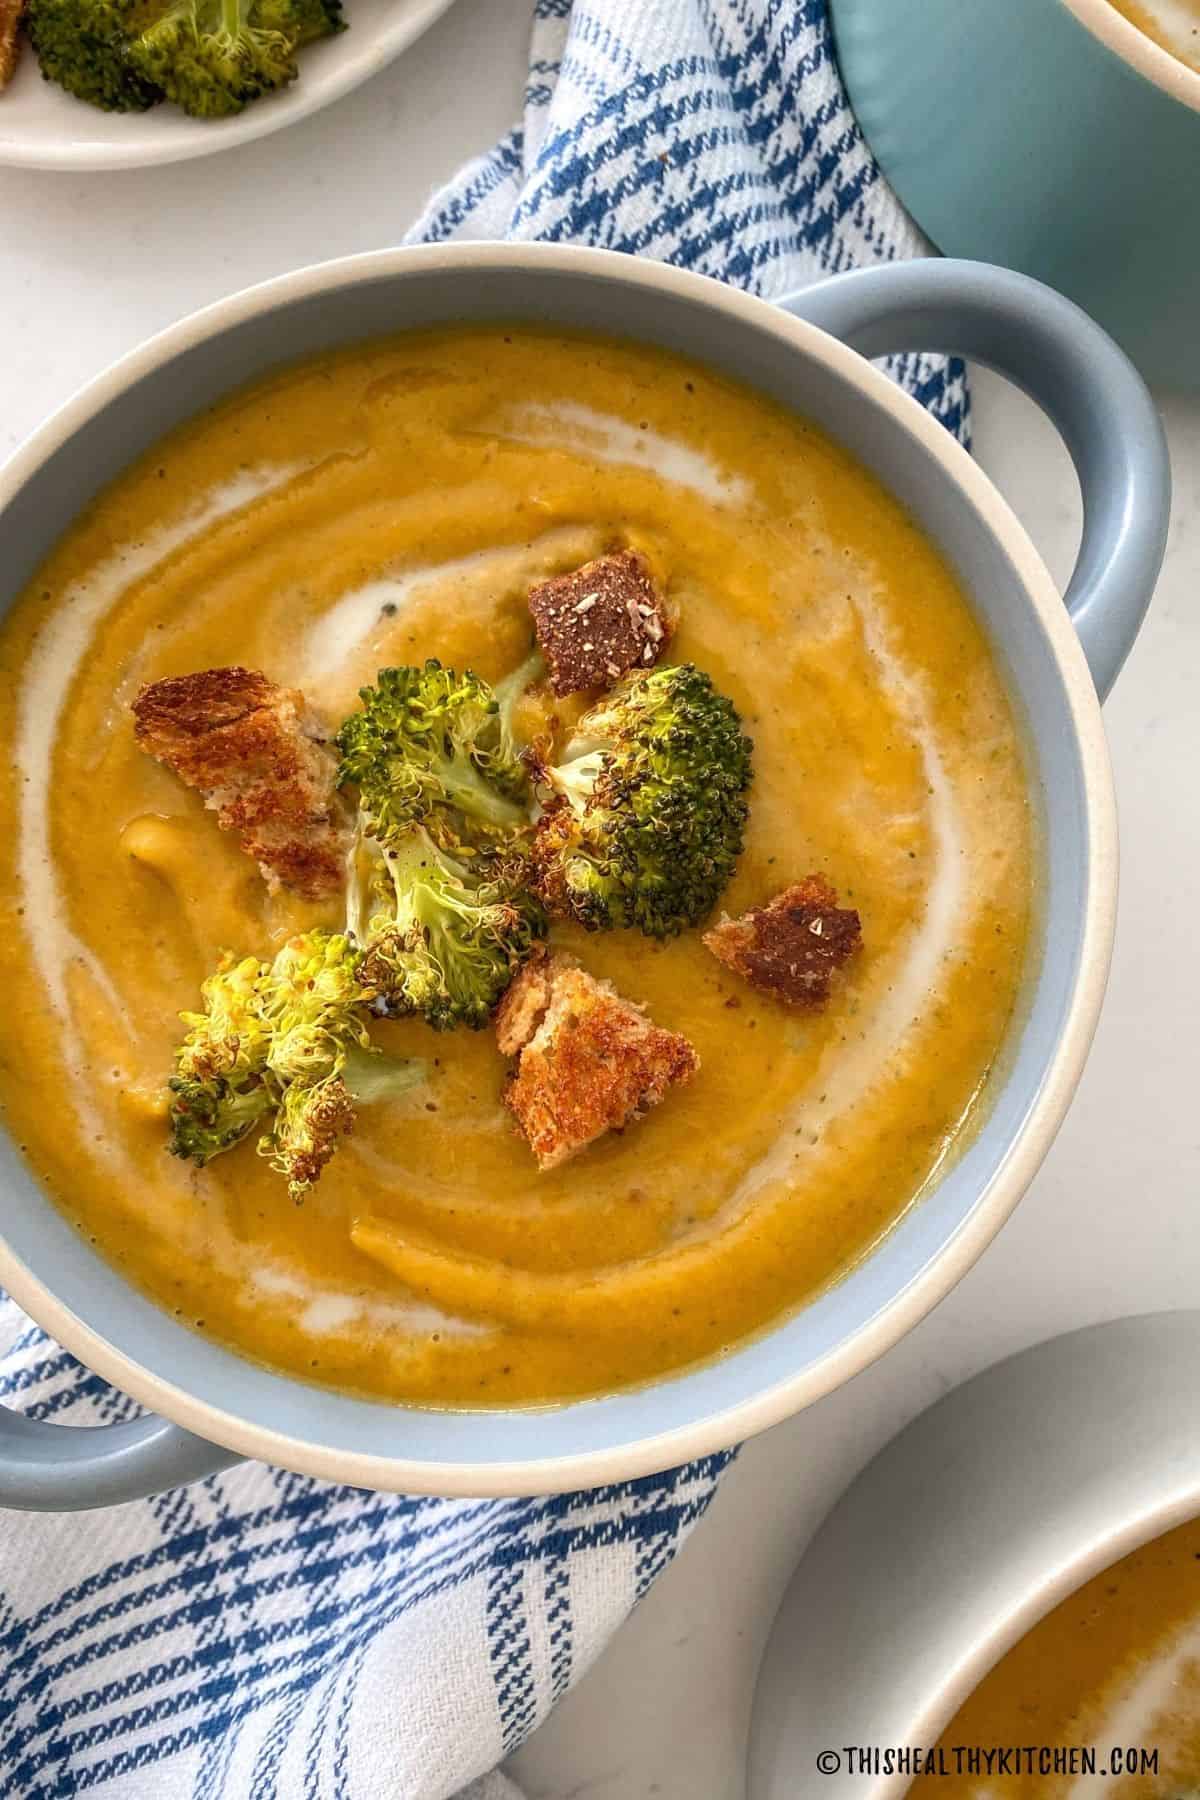 Blue bowl filled with broccoli and sweet potato soup with broccoli florets and croutons on top.